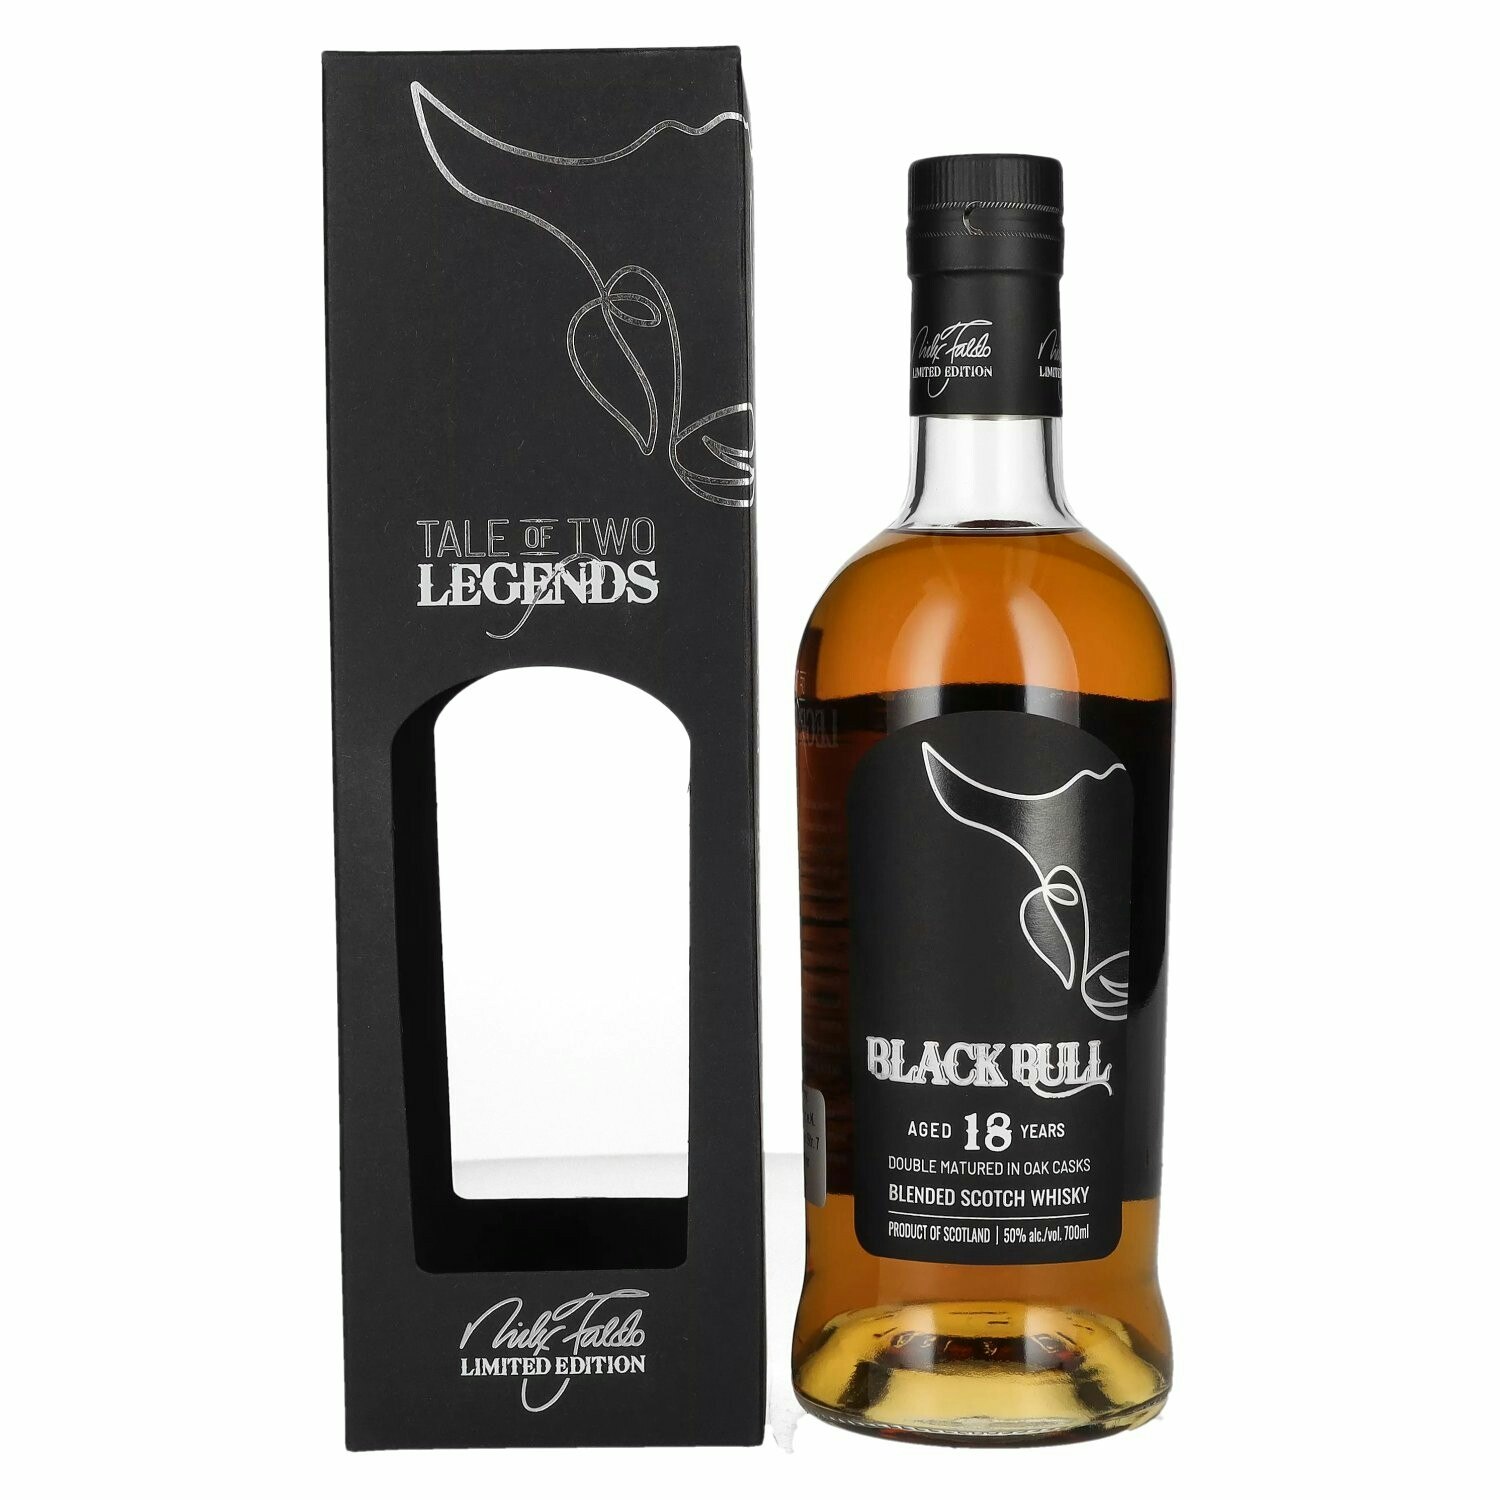 Duncan Taylor Black Bull 18 Years Old Nick Faldo Limited Edition 50% Vol. 0,7l in Giftbox